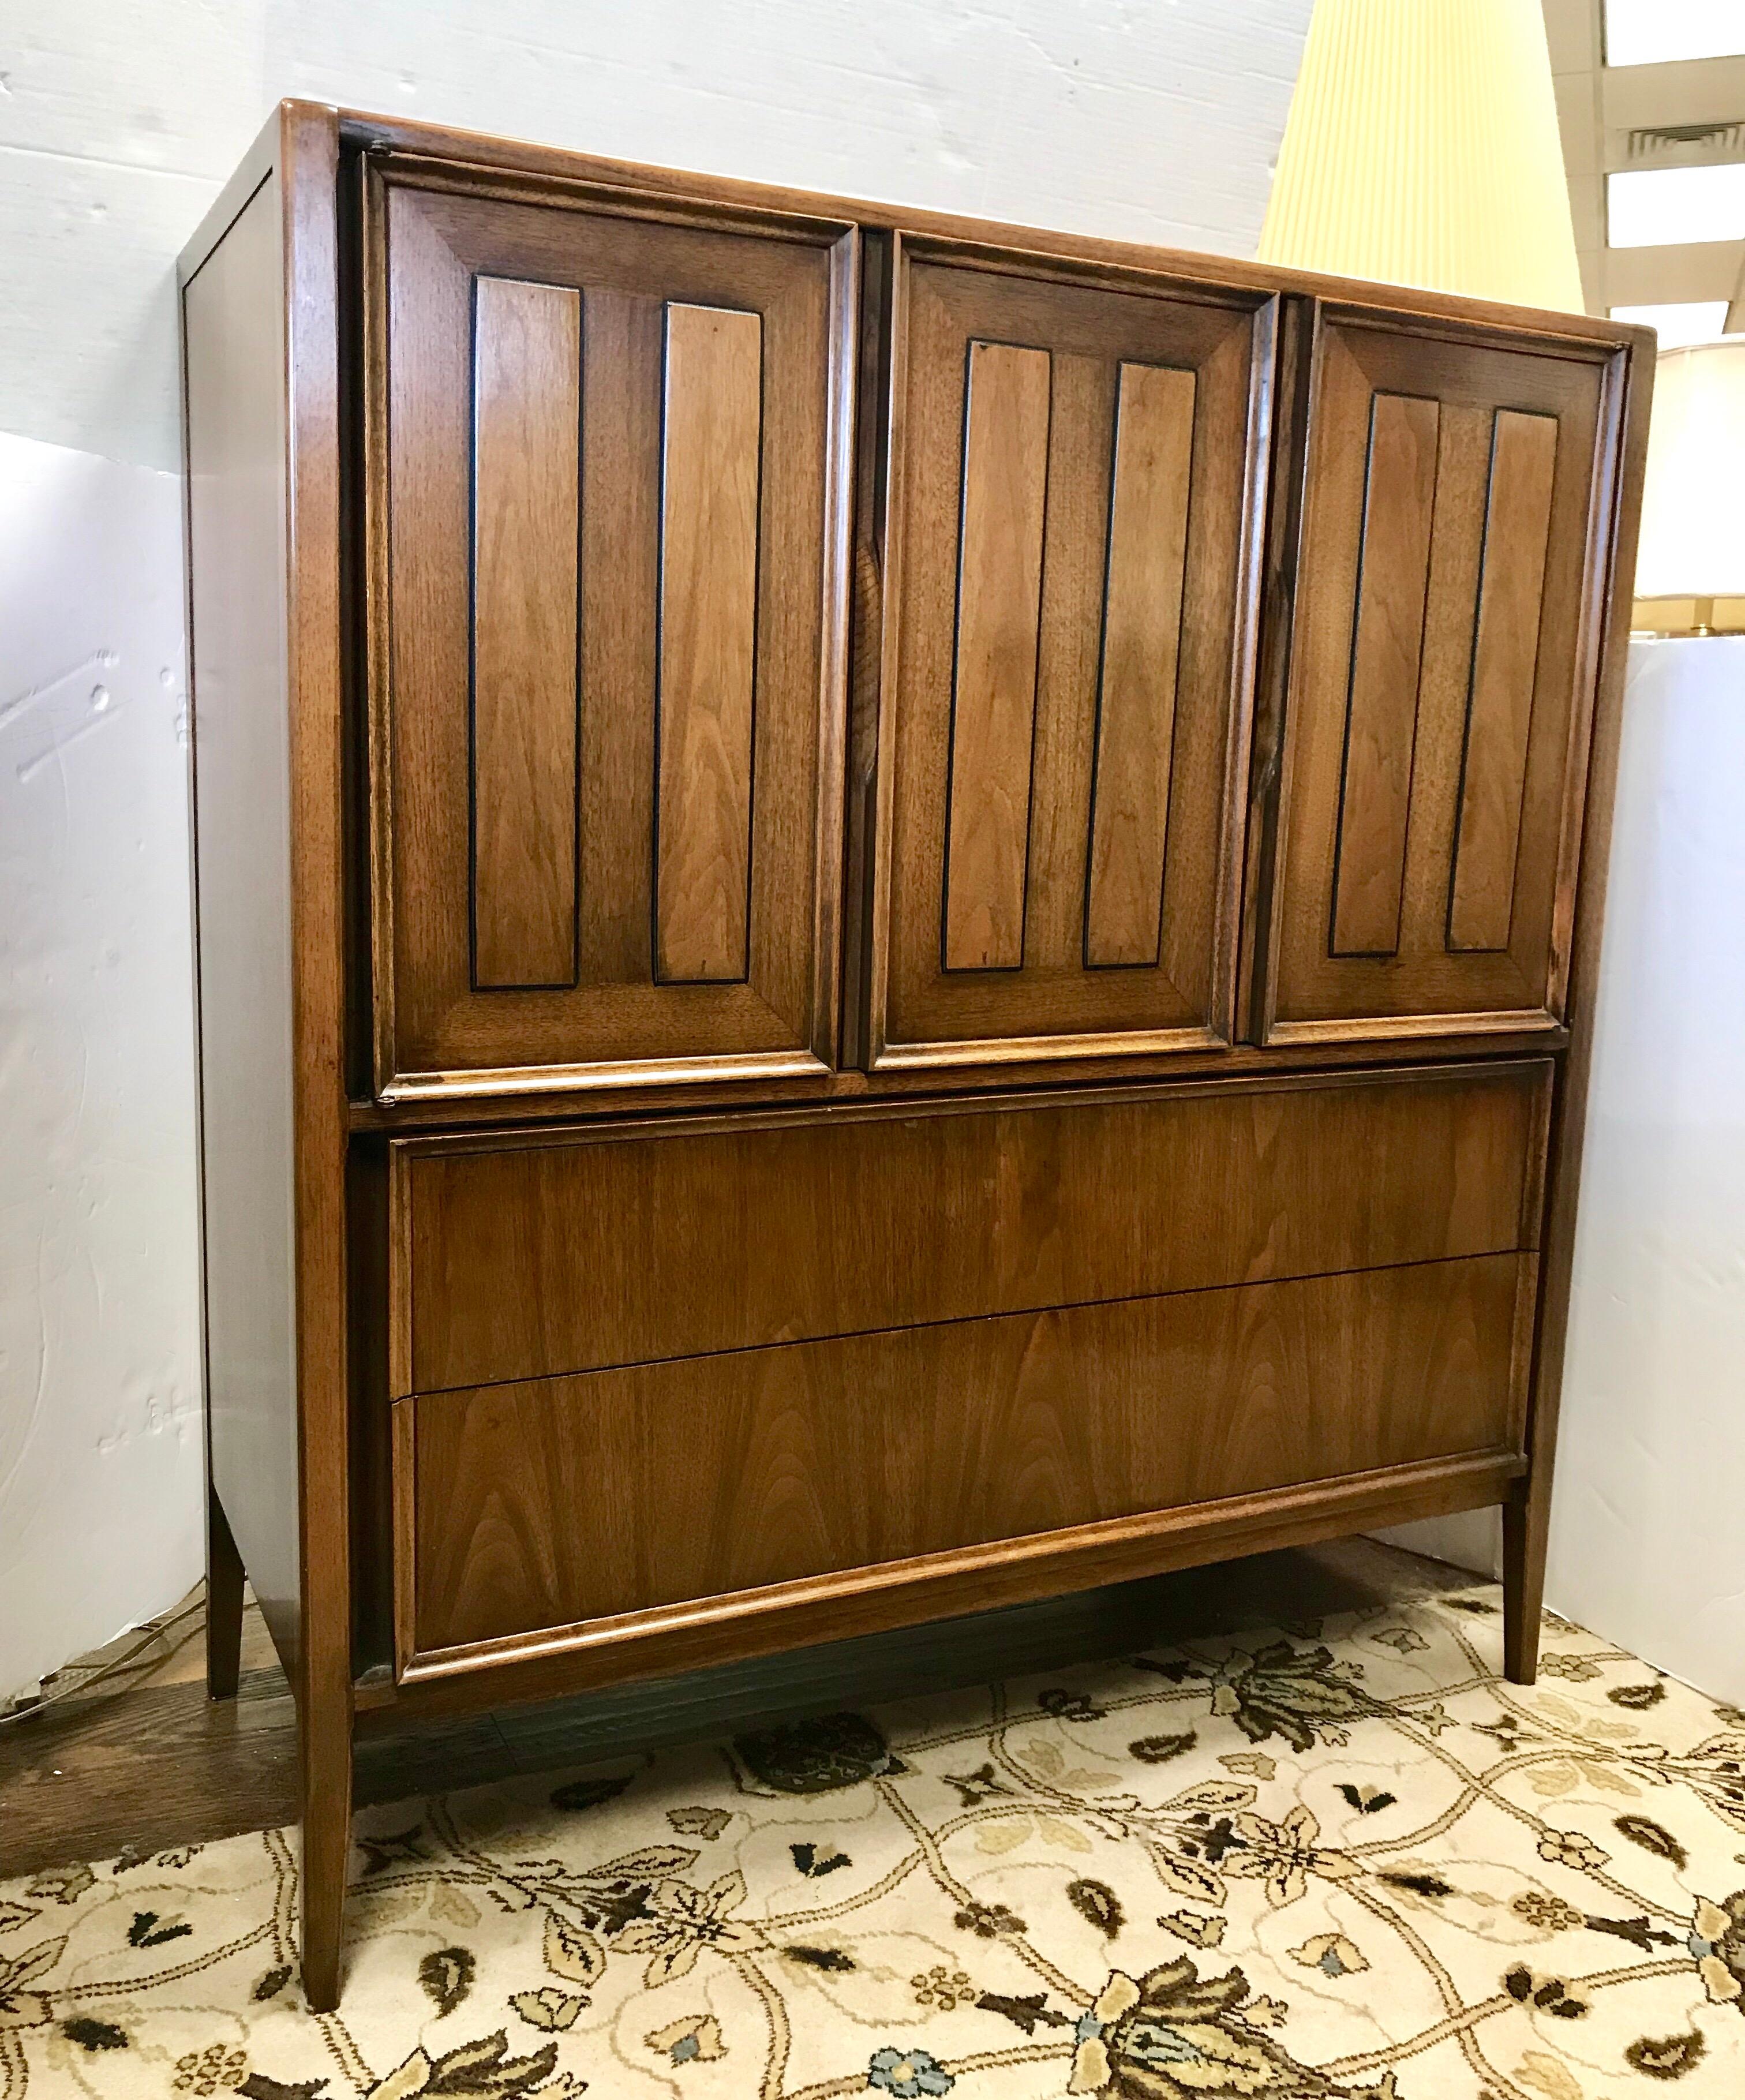 Stunning walnut Classic Thomasville tall wardrobe chest of drawers. Features five drawers in total with the top three hidden behind gorgeous left side folding doors. We will also be listing a companion chest of drawers this week that matches.